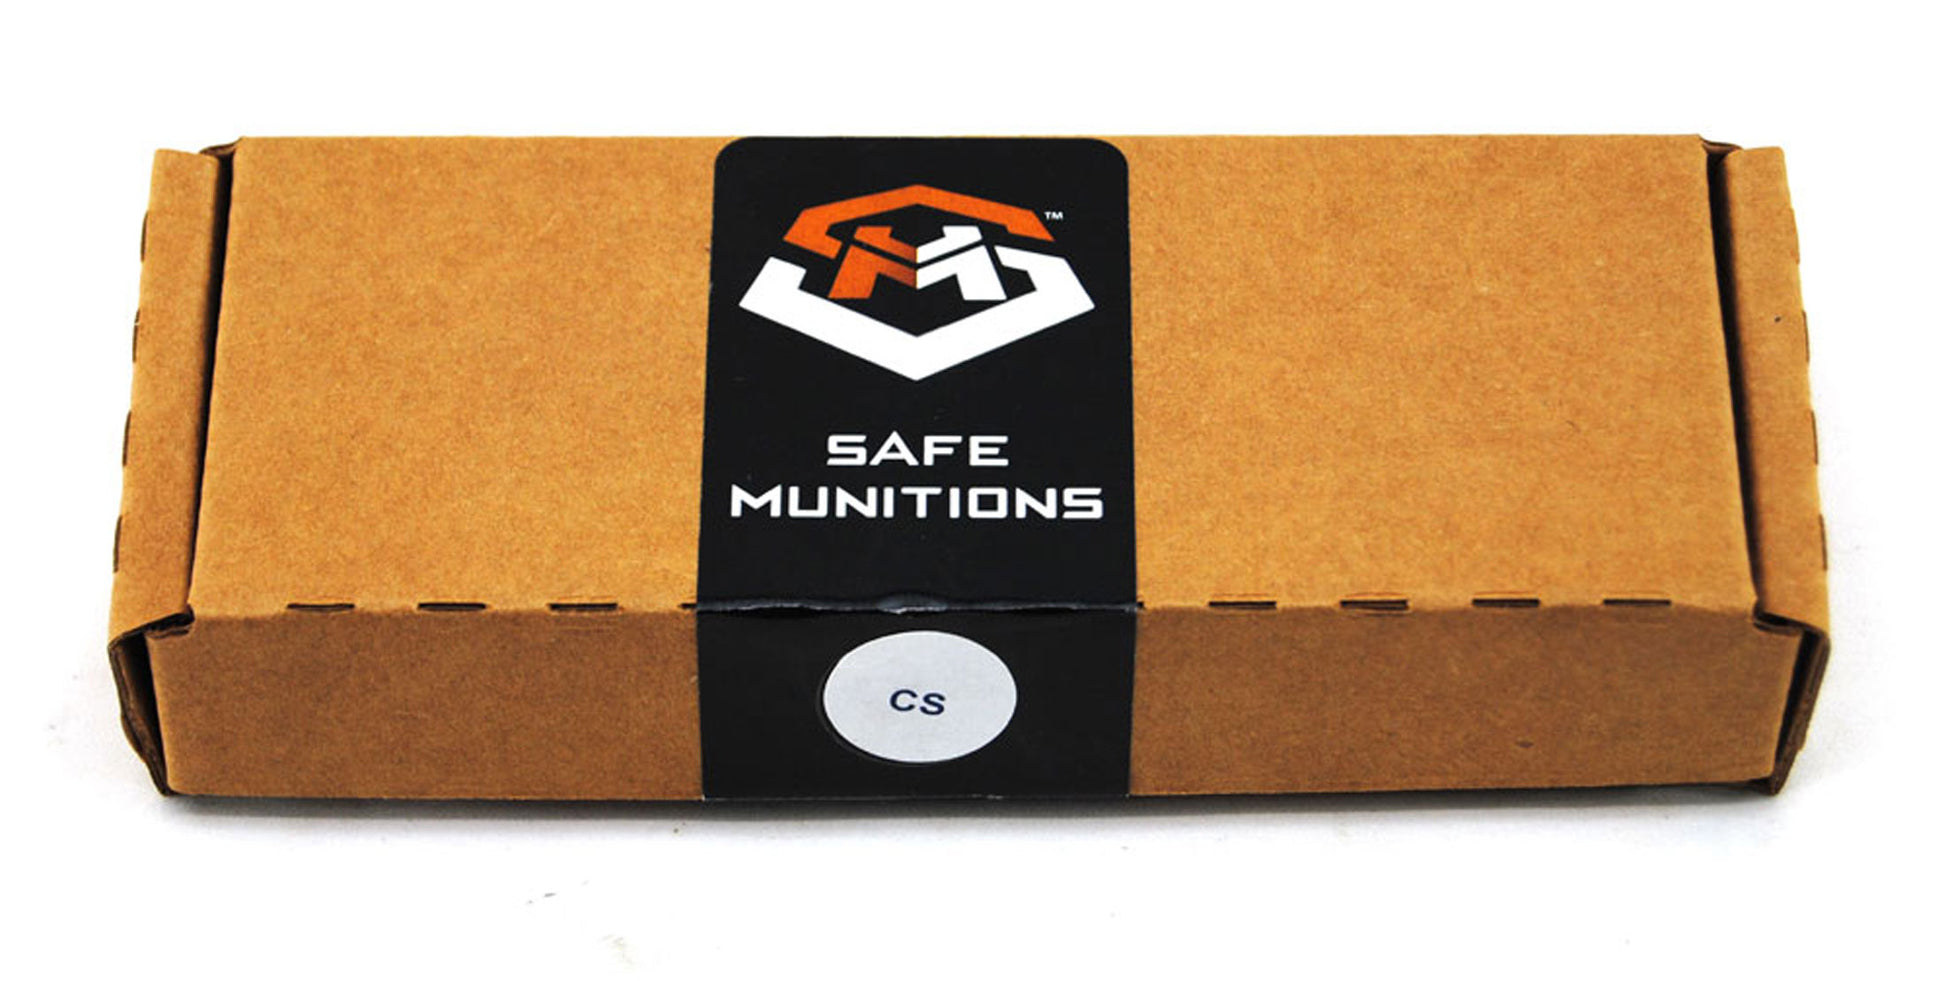 Mission Operational Munitions CS Live Rounds - 10 Rounds - Mission Less Lethal